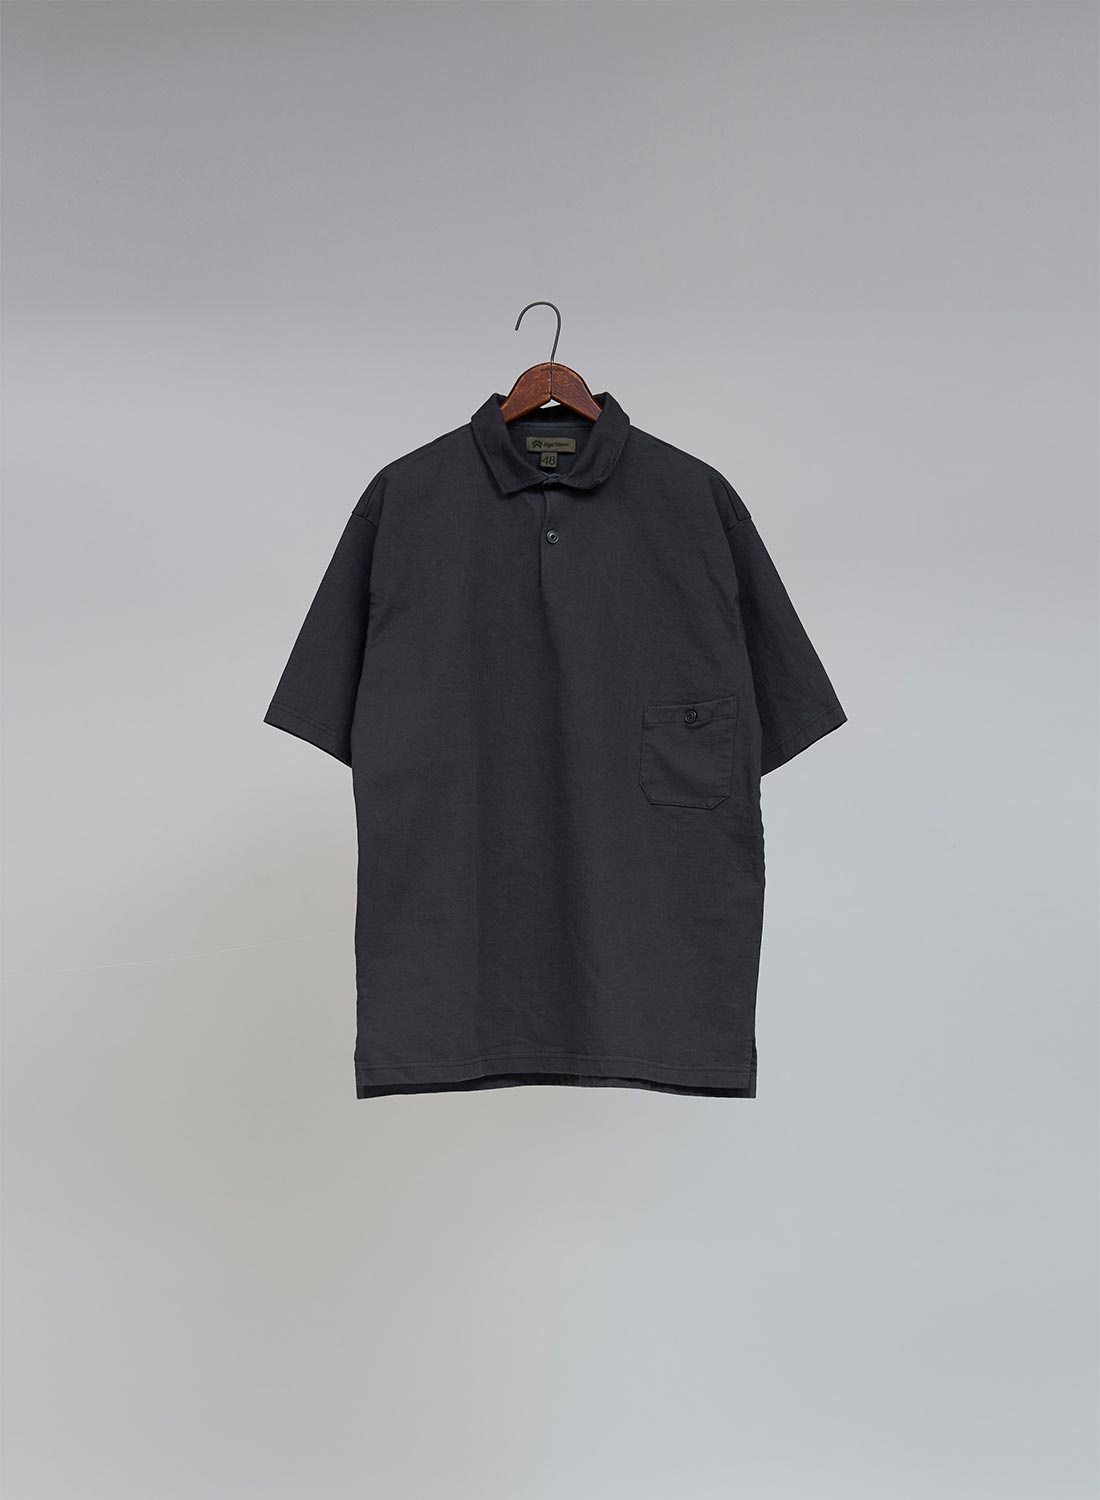 Rugger Shirt New Zealand Type in Charcoal Grey - 1